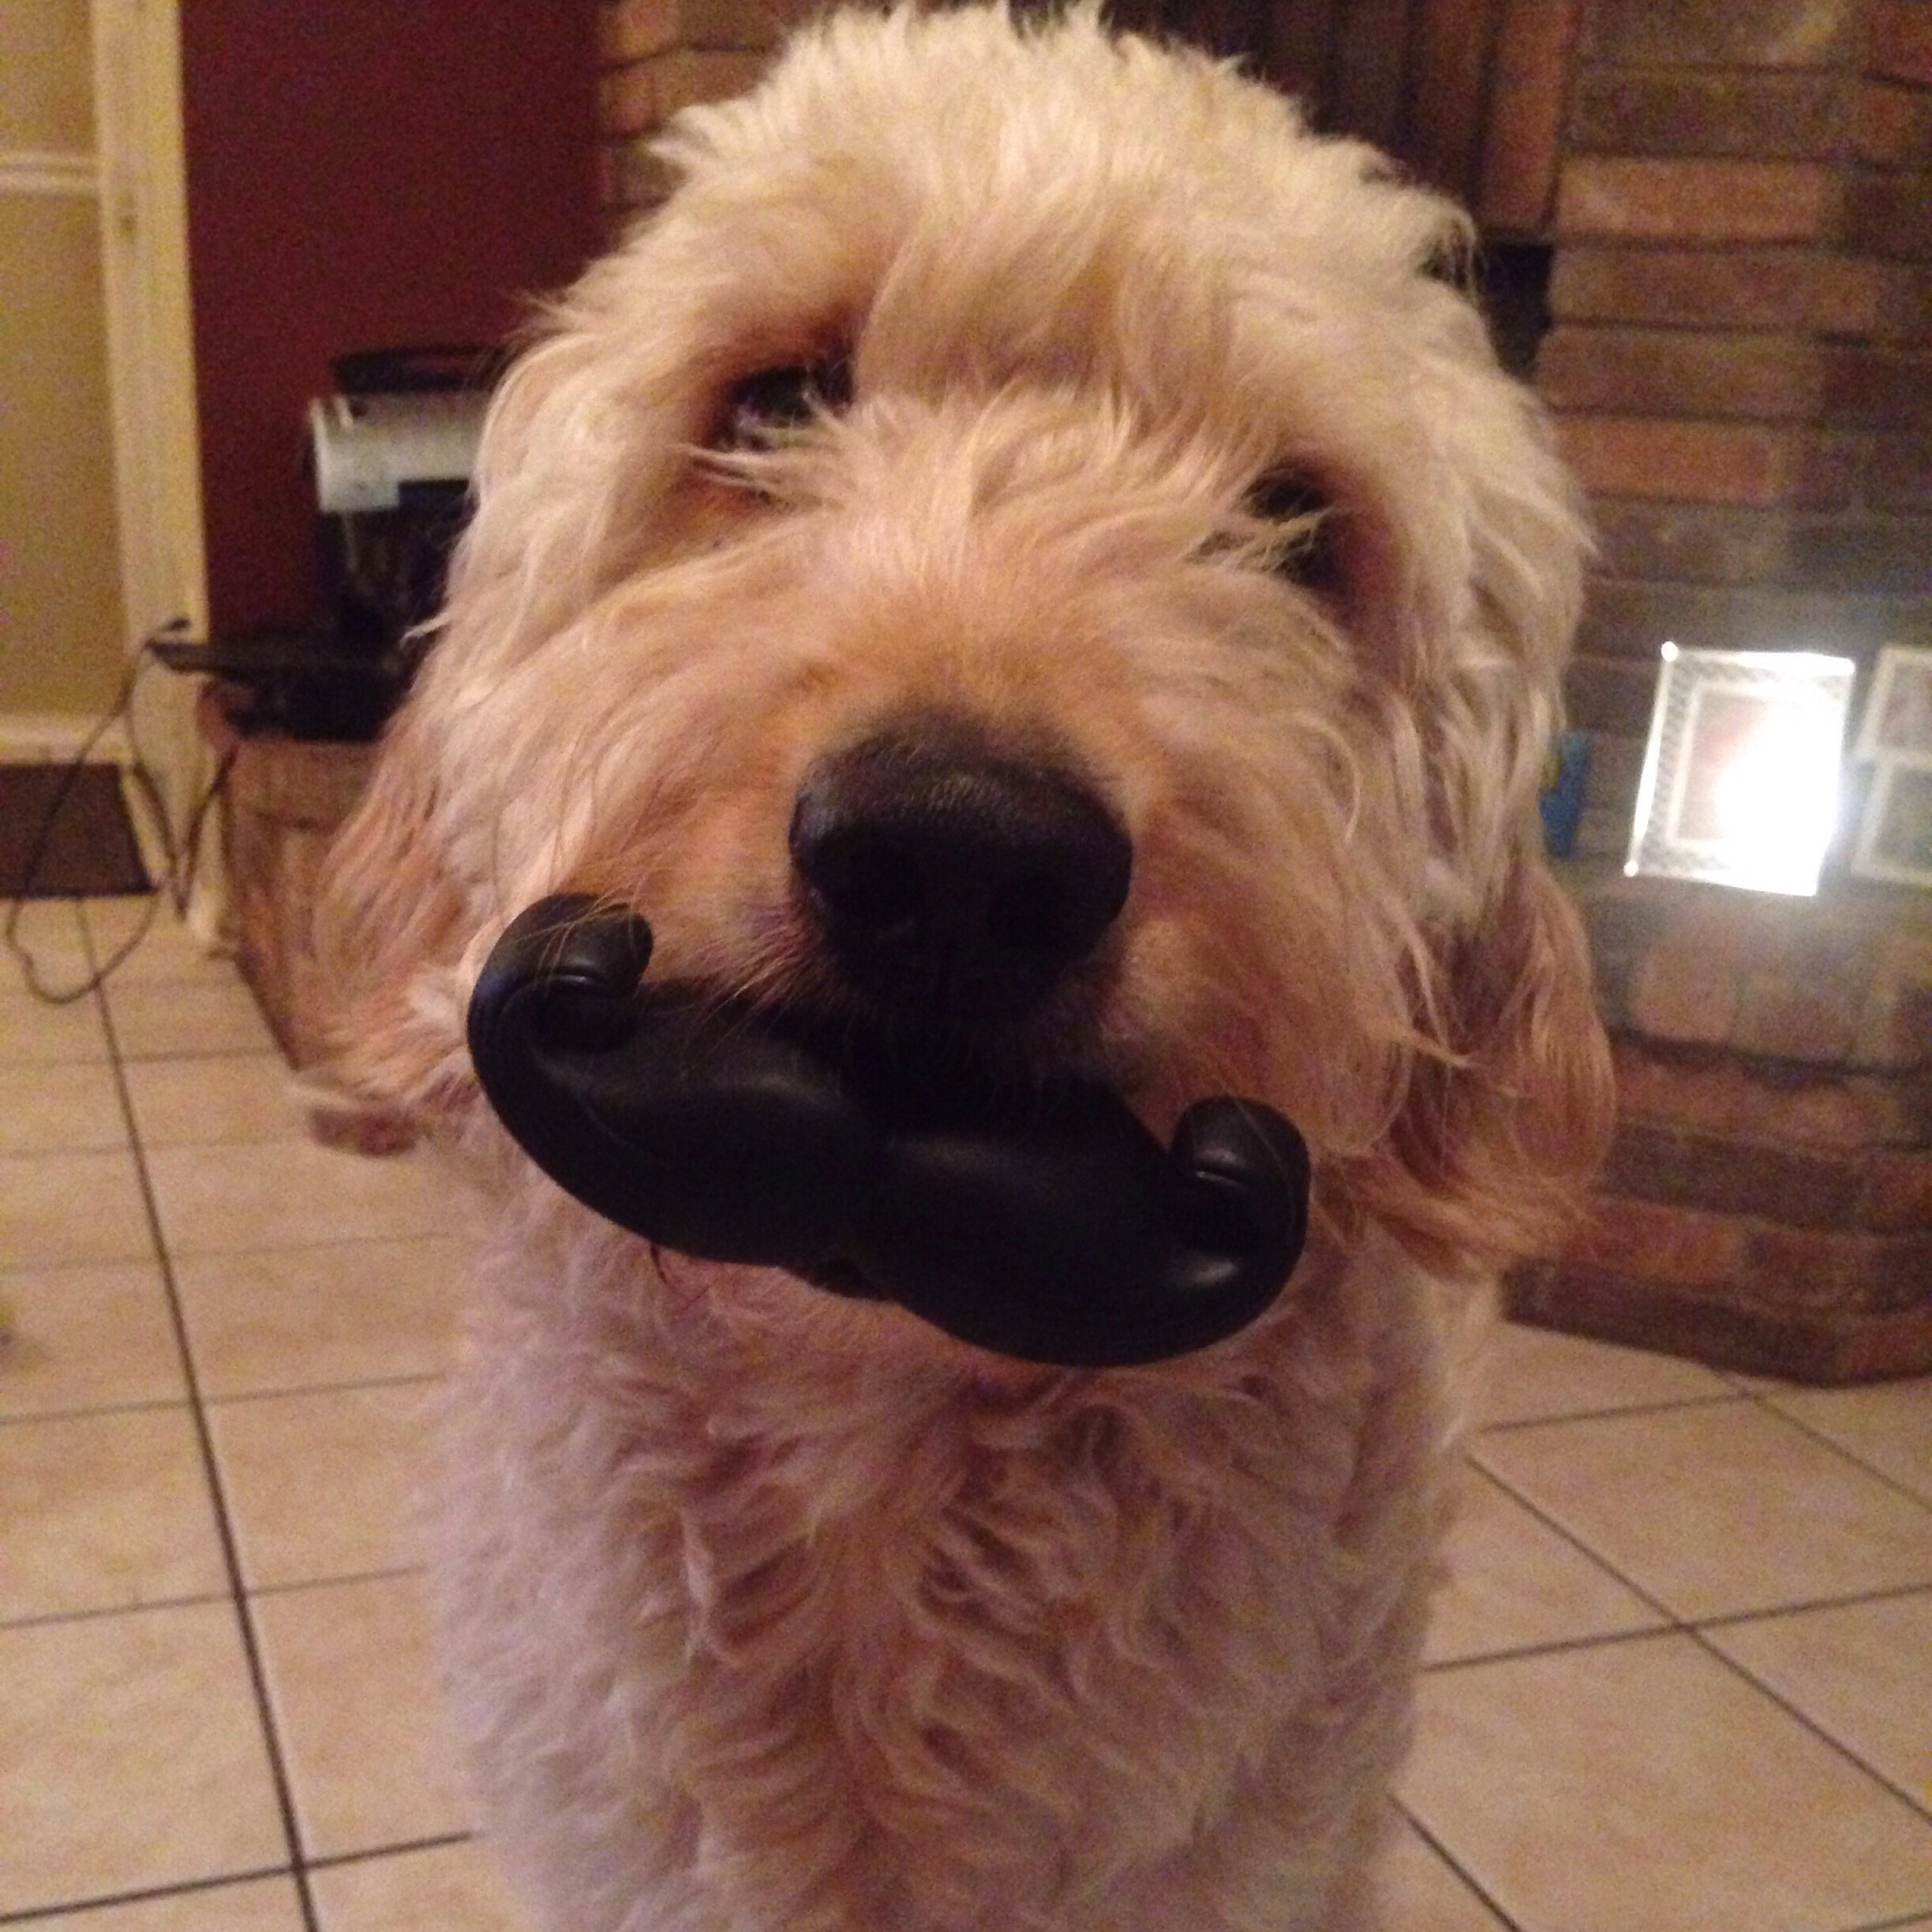 A Goldendoodle sitting on the floor with a mustache toy in its mouth